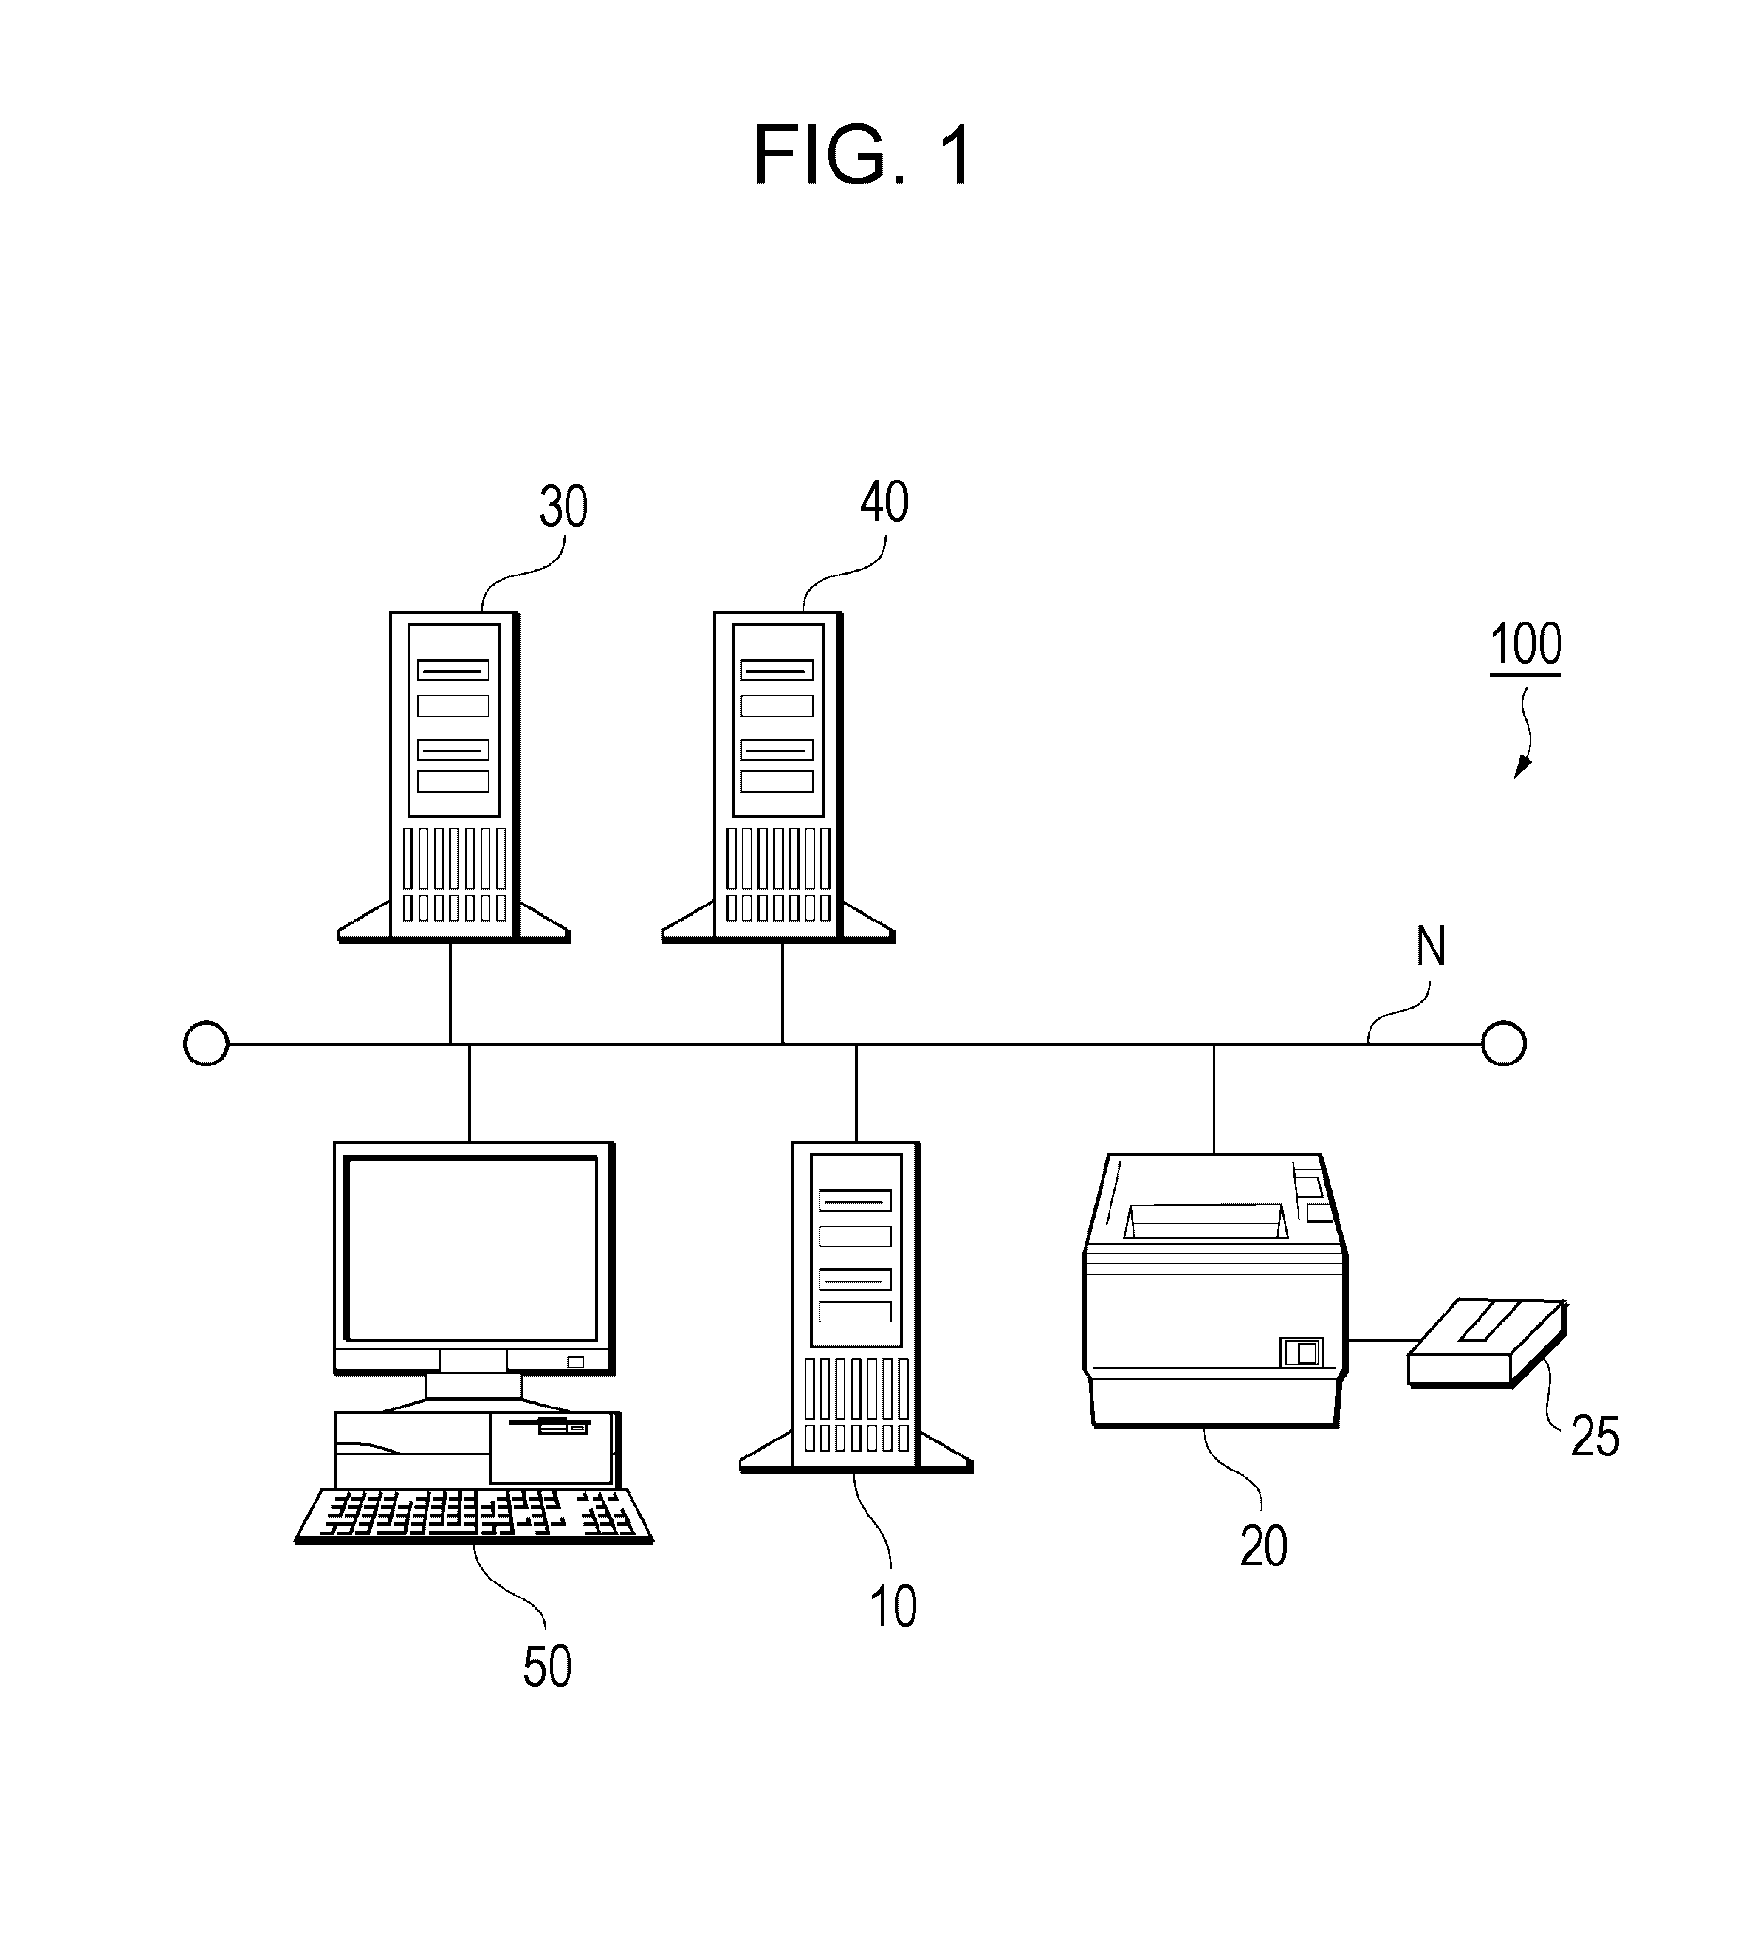 Authenticated printing system and authenticated printing method